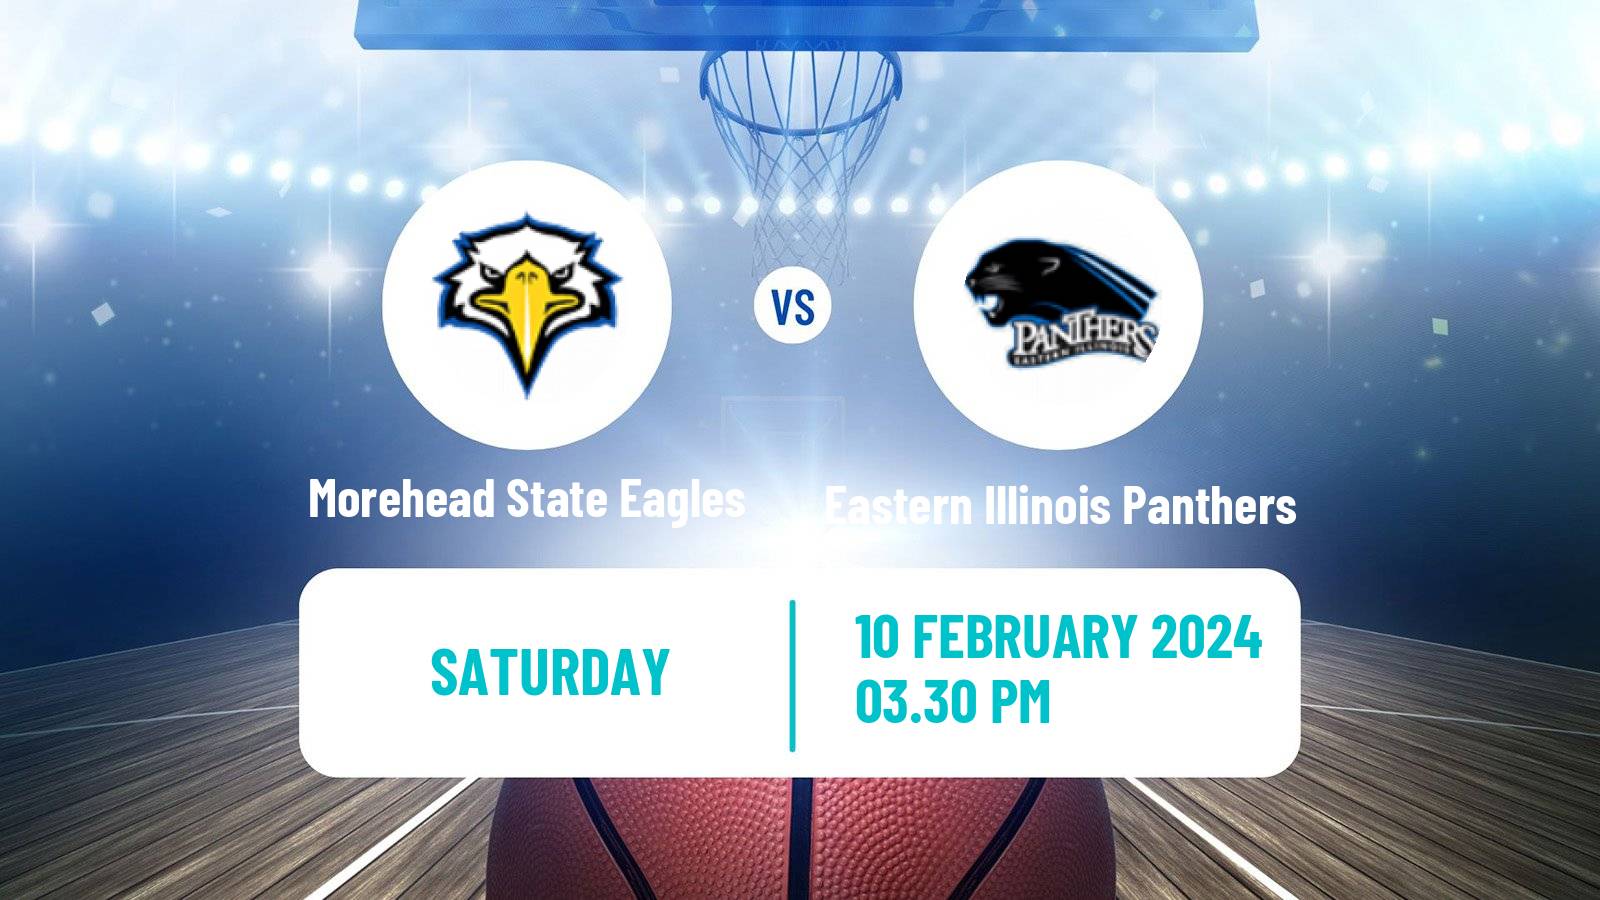 Basketball NCAA College Basketball Morehead State Eagles - Eastern Illinois Panthers